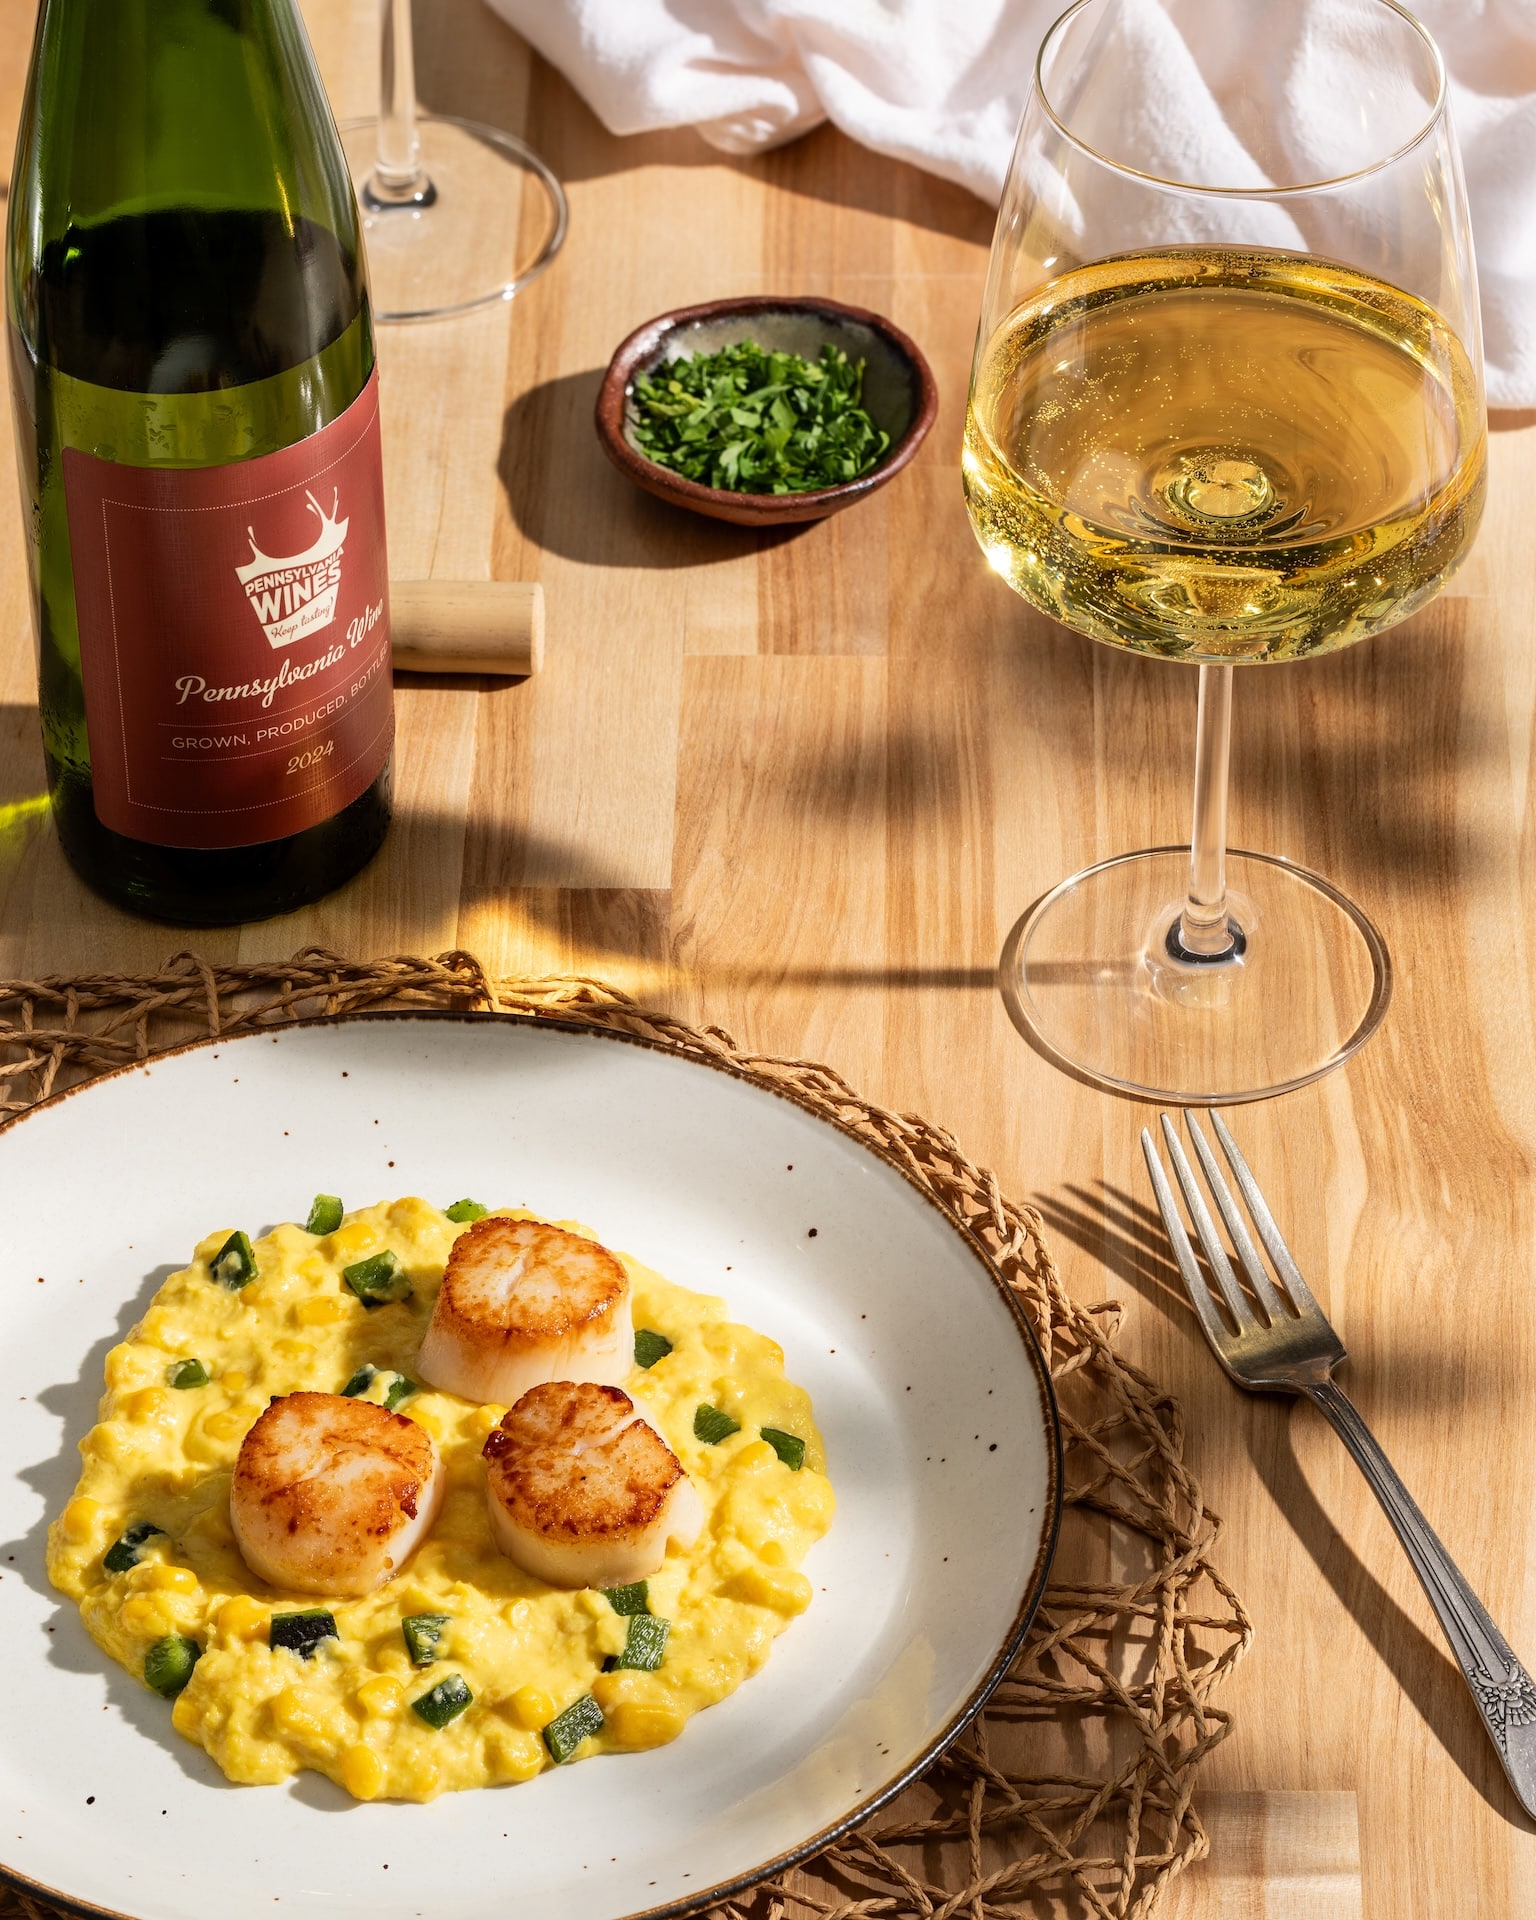 Seared Scallops with Sweet Corn and dry Pennsylvania Riesling